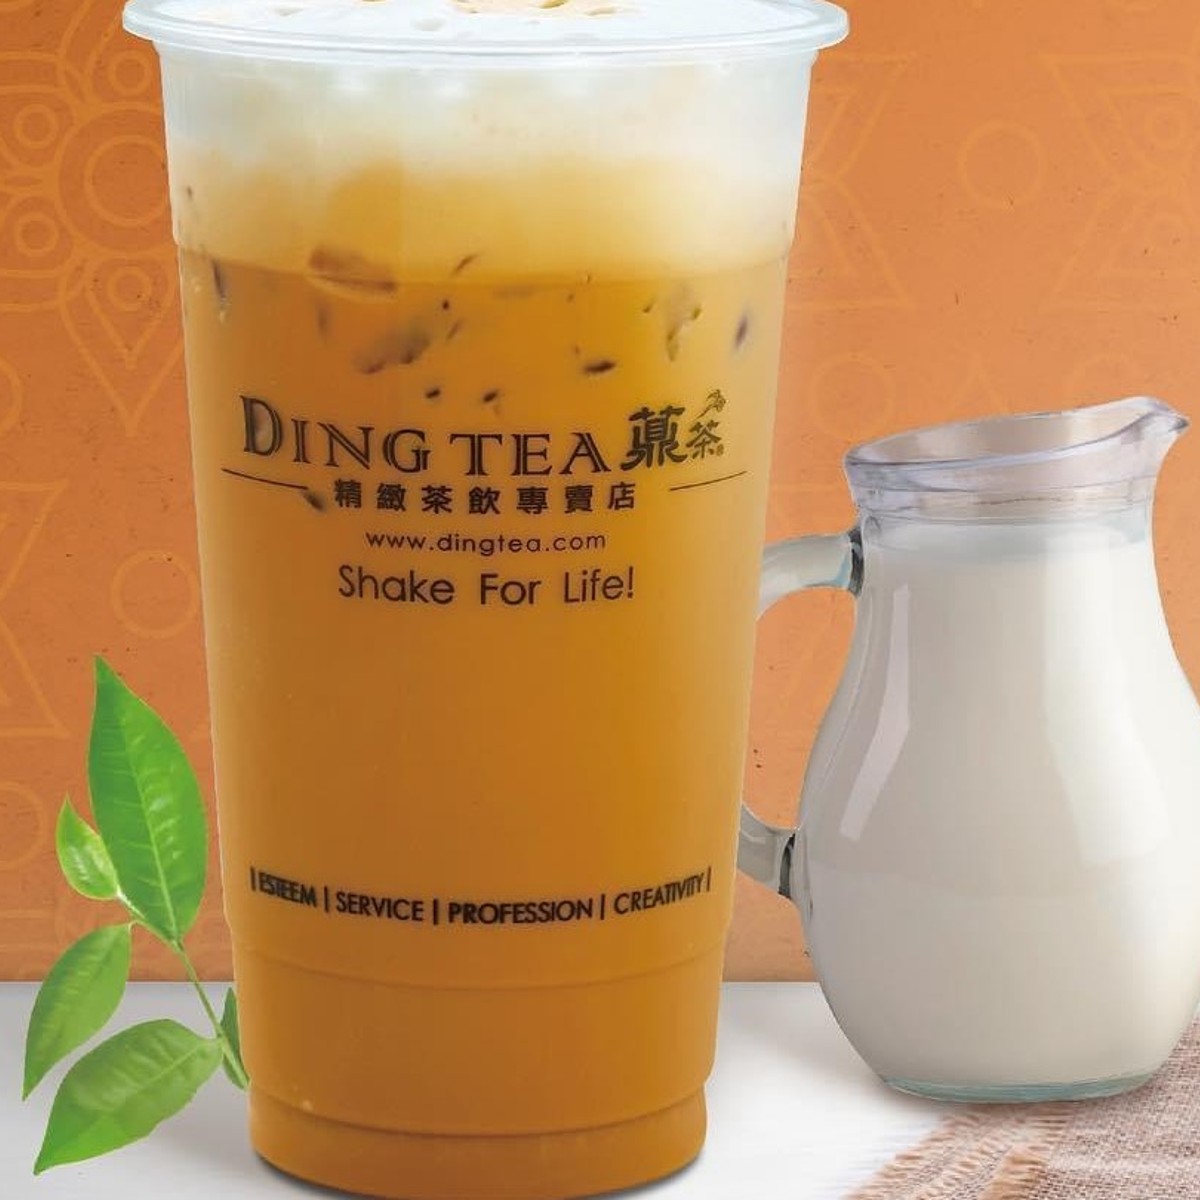 Ding Tea to Bring Their Latest Cafe to Carlsbad